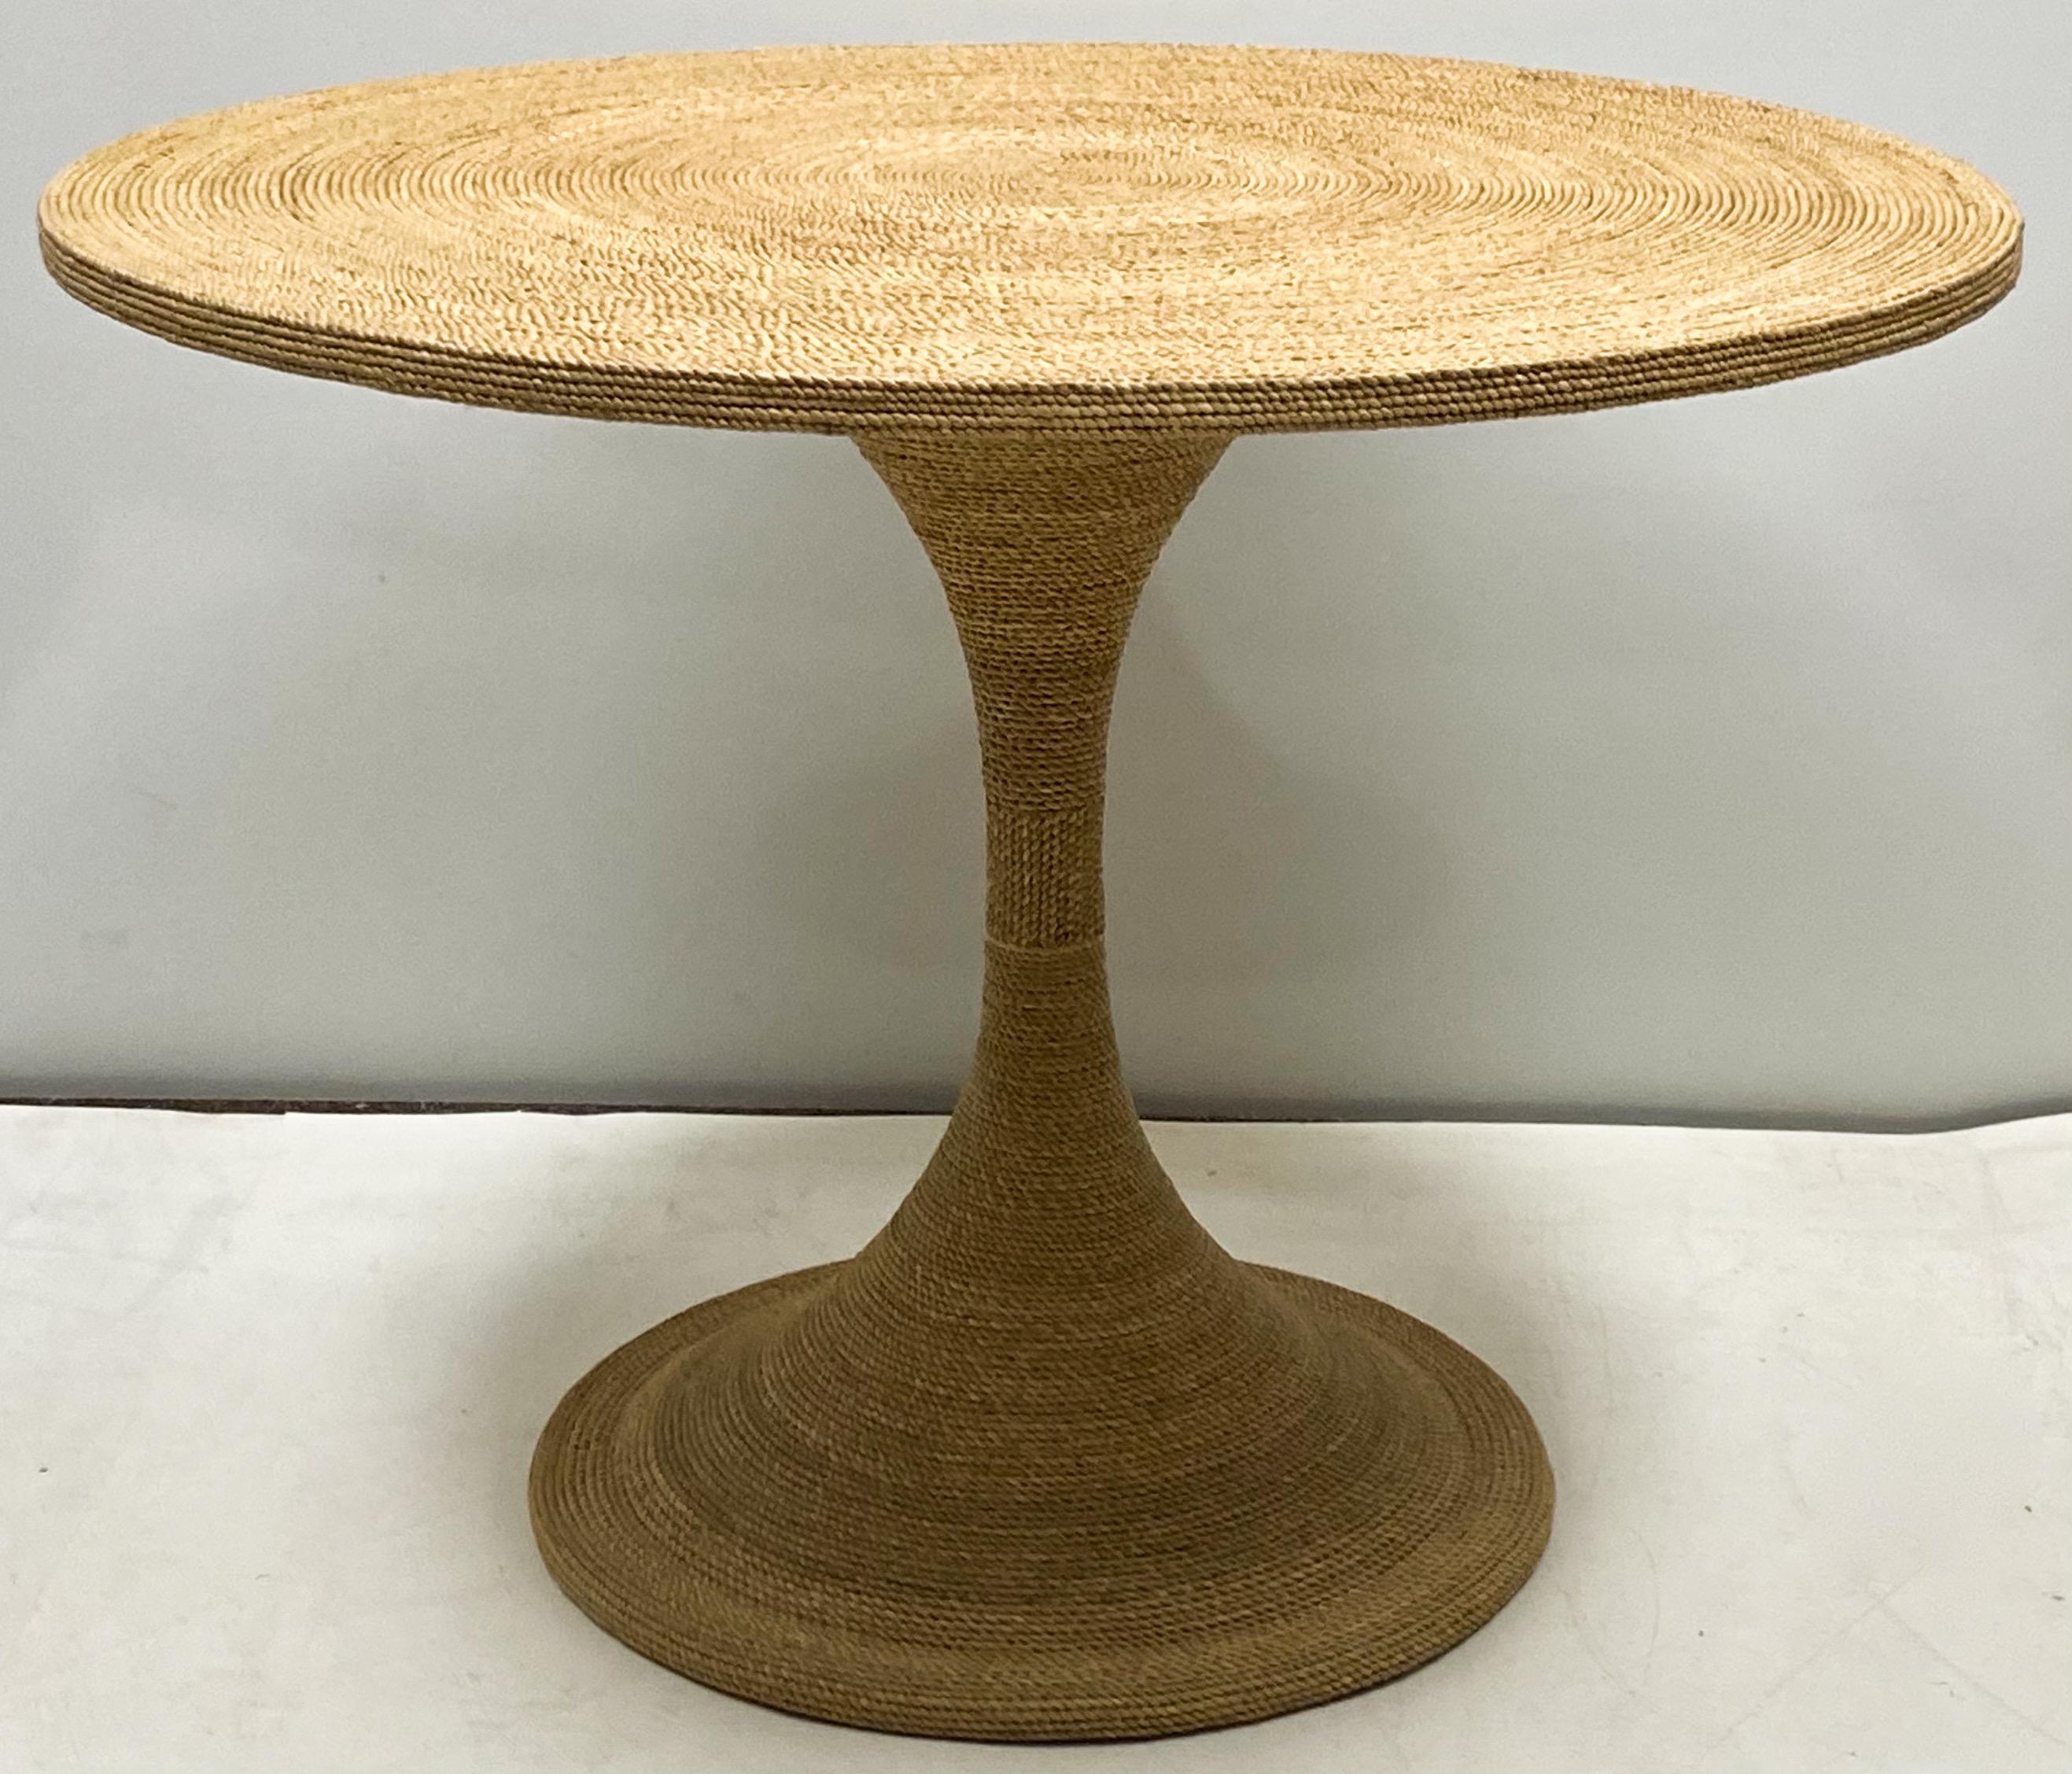 Philippine 1970s Modern Tulip Style Woven Seagrass Center Table